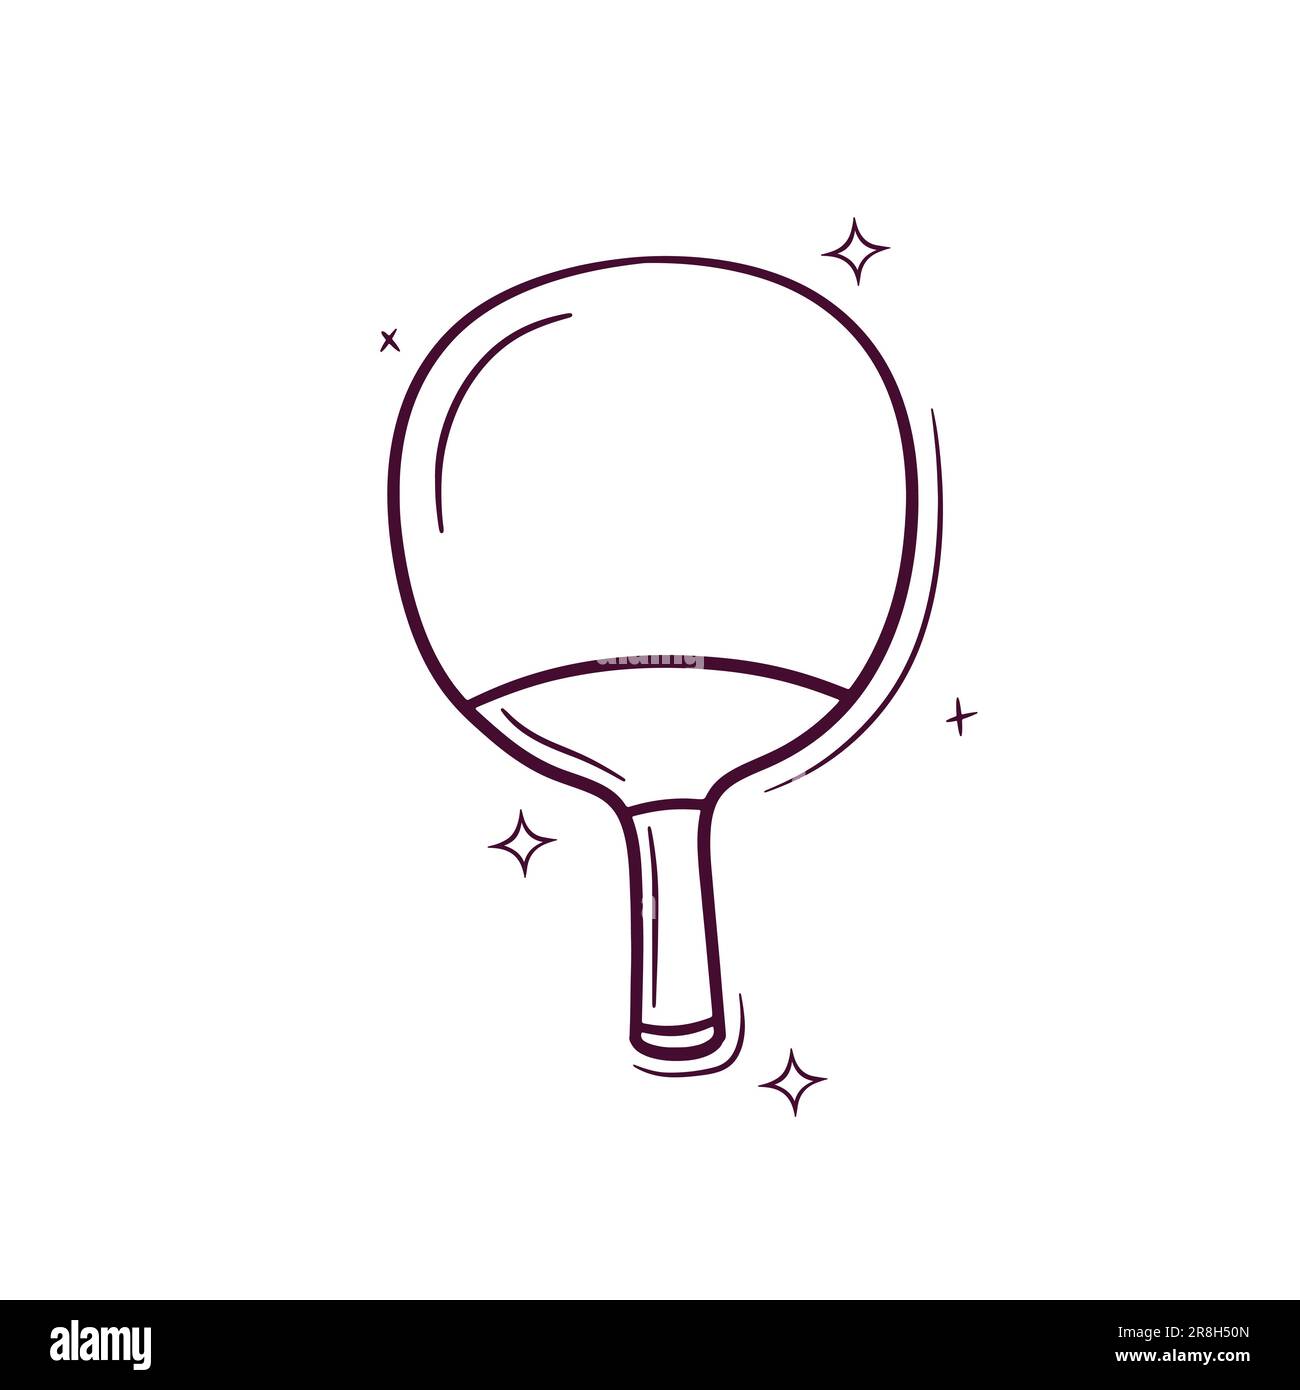 Hand Drawn Table Tennis Paddle. Doodle Vector Sketch Illustration Stock Vector